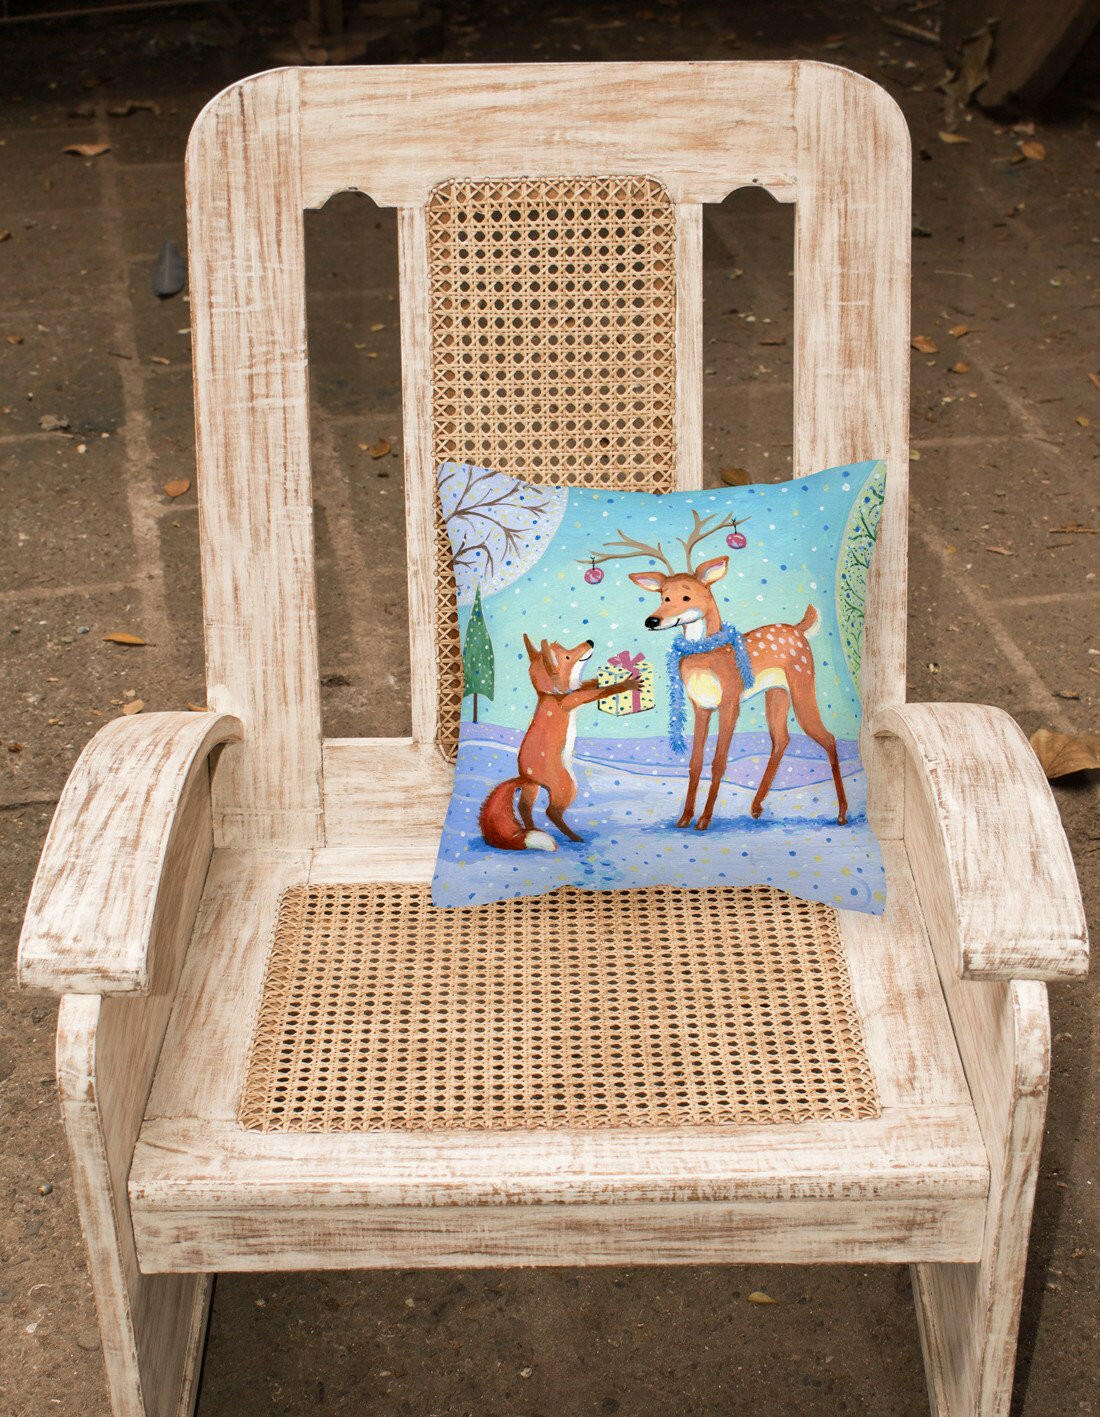 Christmas Present from the Fox Canvas Decorative Pillow CDCO0416PW1414 - the-store.com